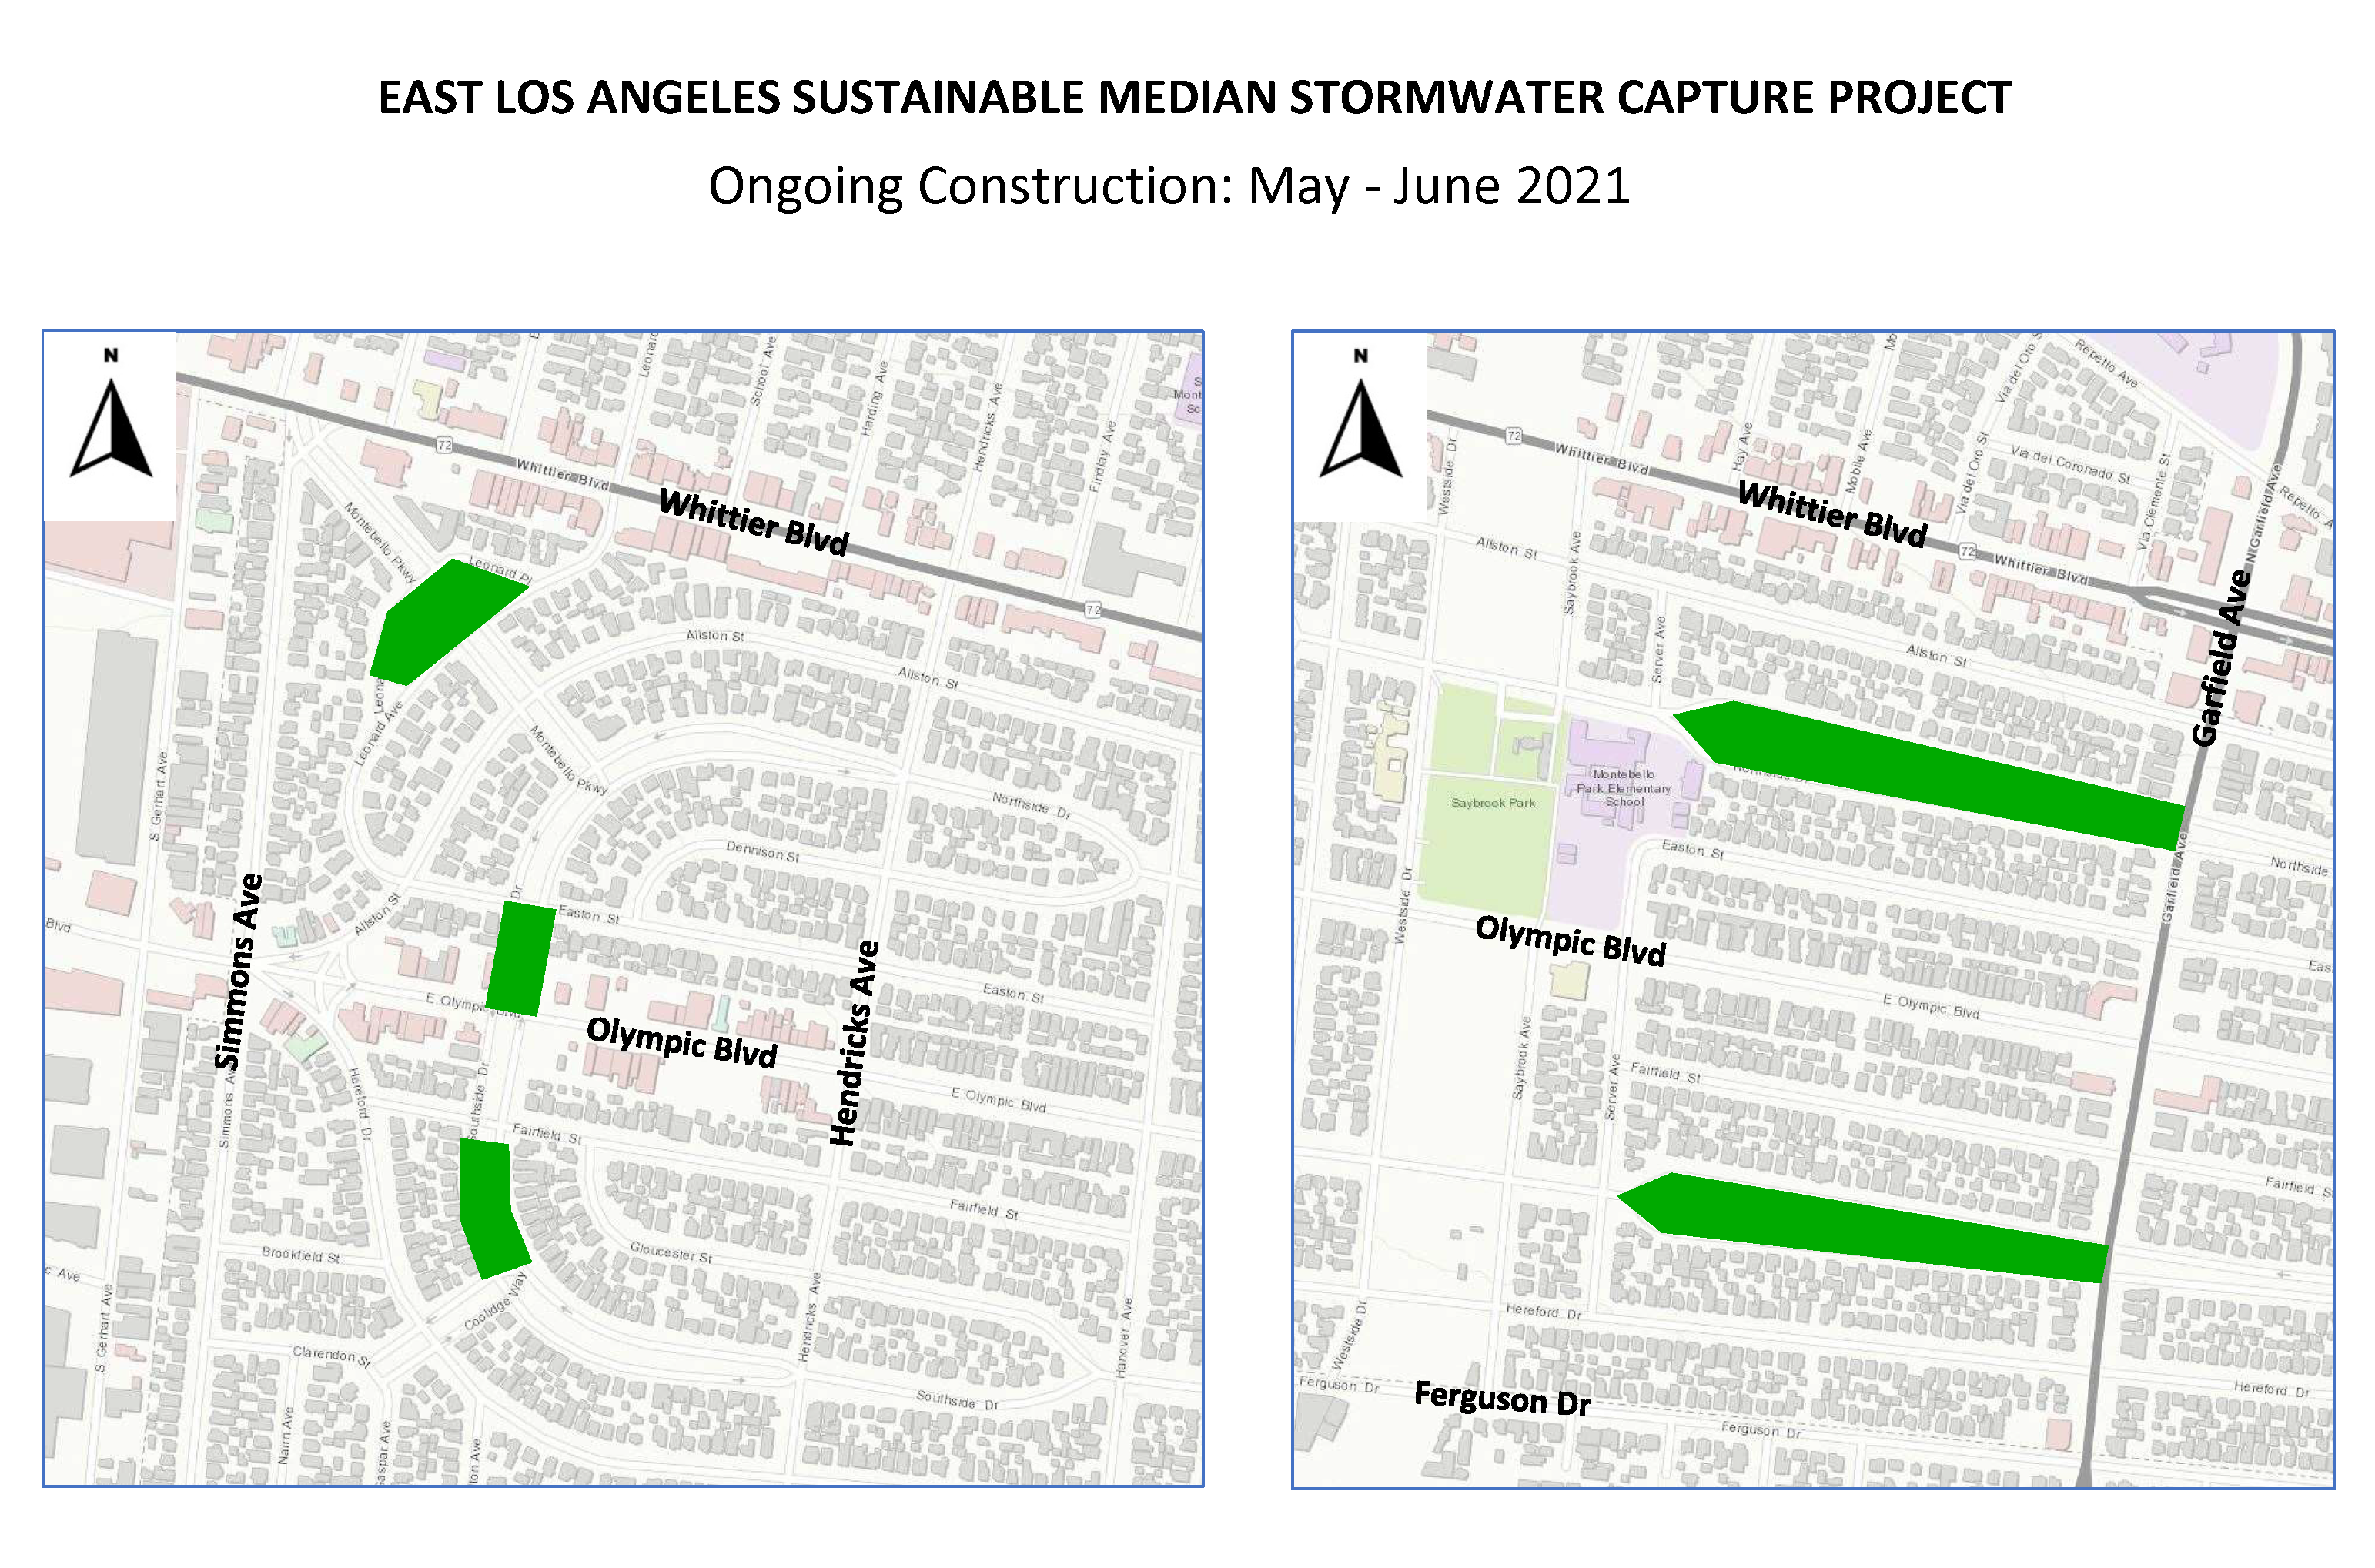 Map of East Los Angeles Sustainable Median Stormwater Capture Project. Image: Los Angeles County Public Works